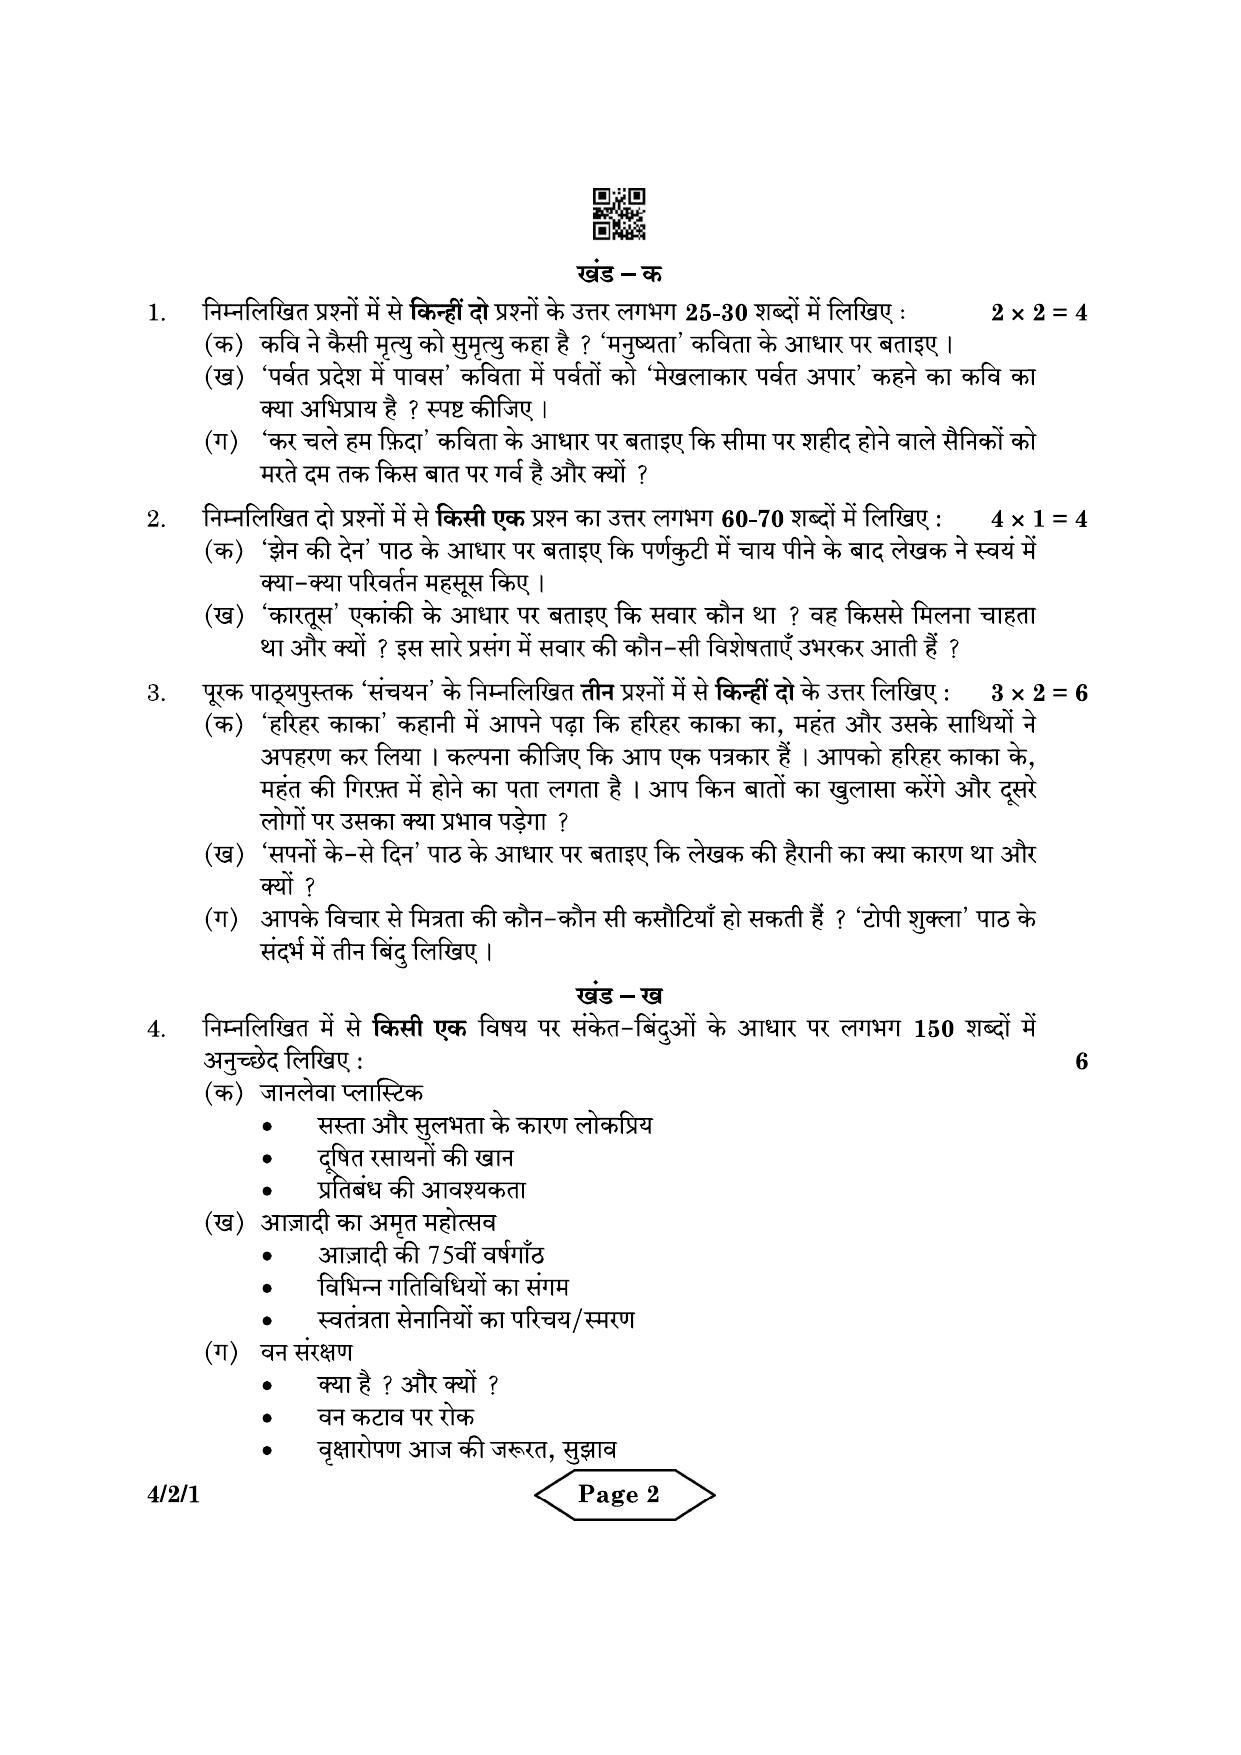 CBSE Class 10 4-2-1 Hindi B 2022 Question Paper - Page 2